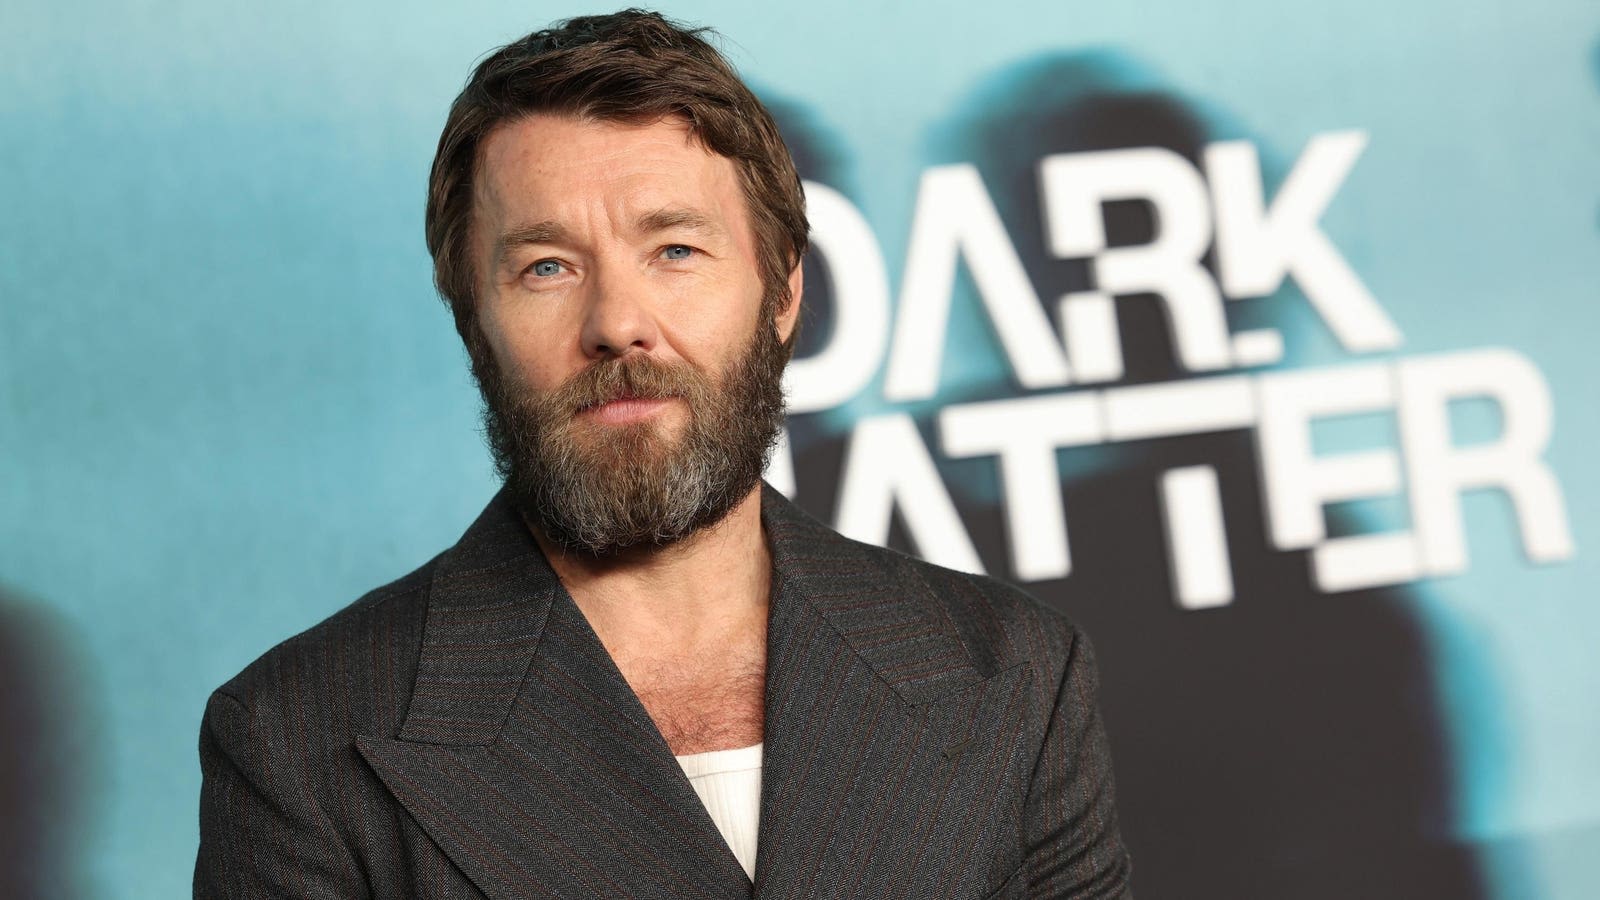 ‘Dark Matter’ Helped Joel Edgerton Realize He Wouldn’t Change A Thing